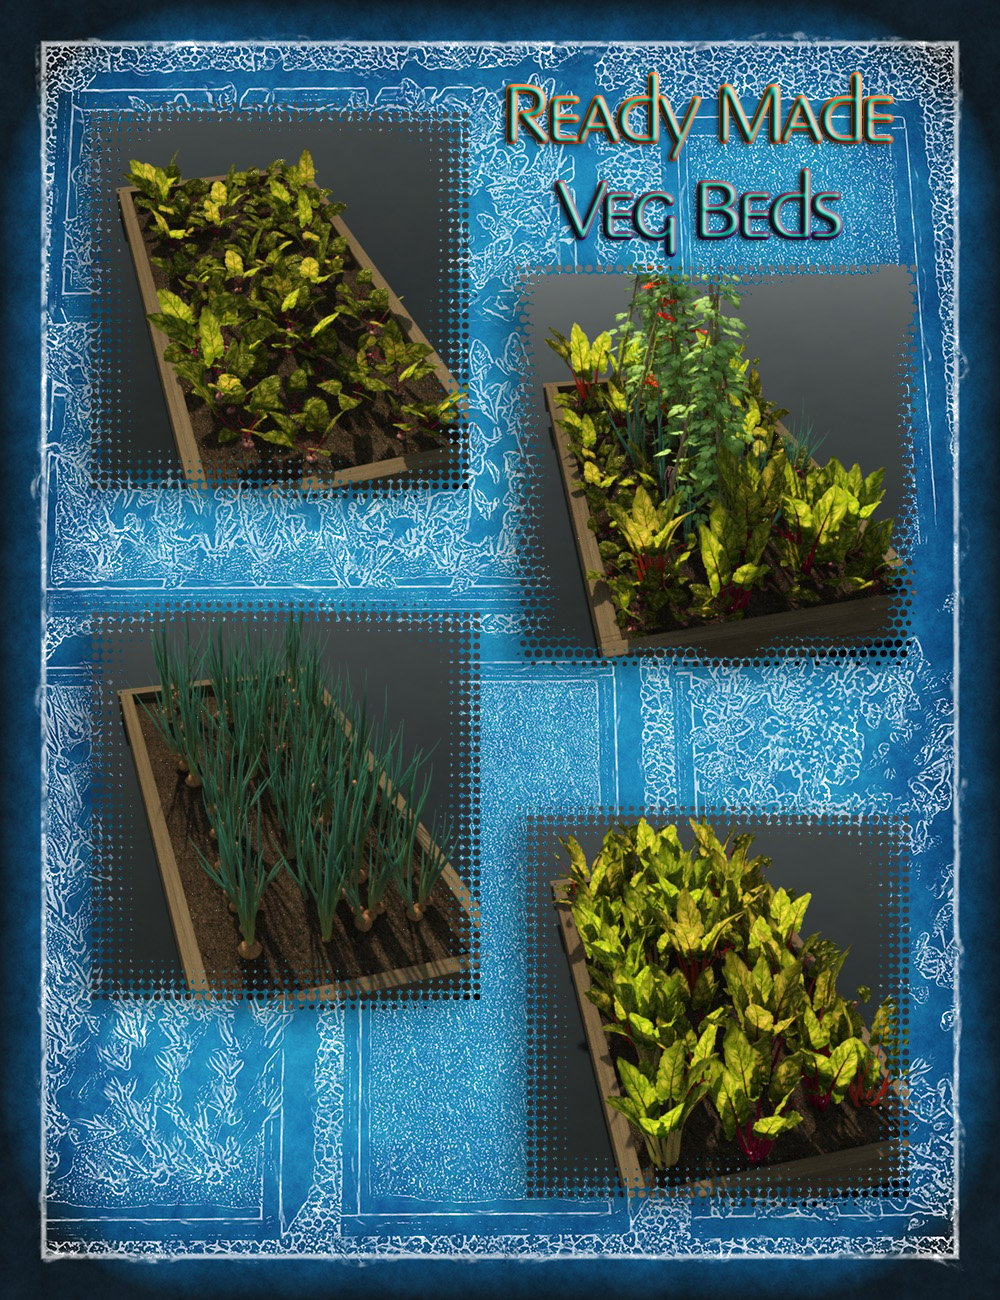 Vegetable Plot - Veg Plants and Raised Beds for Iray by: MartinJFrost, 3D Models by Daz 3D